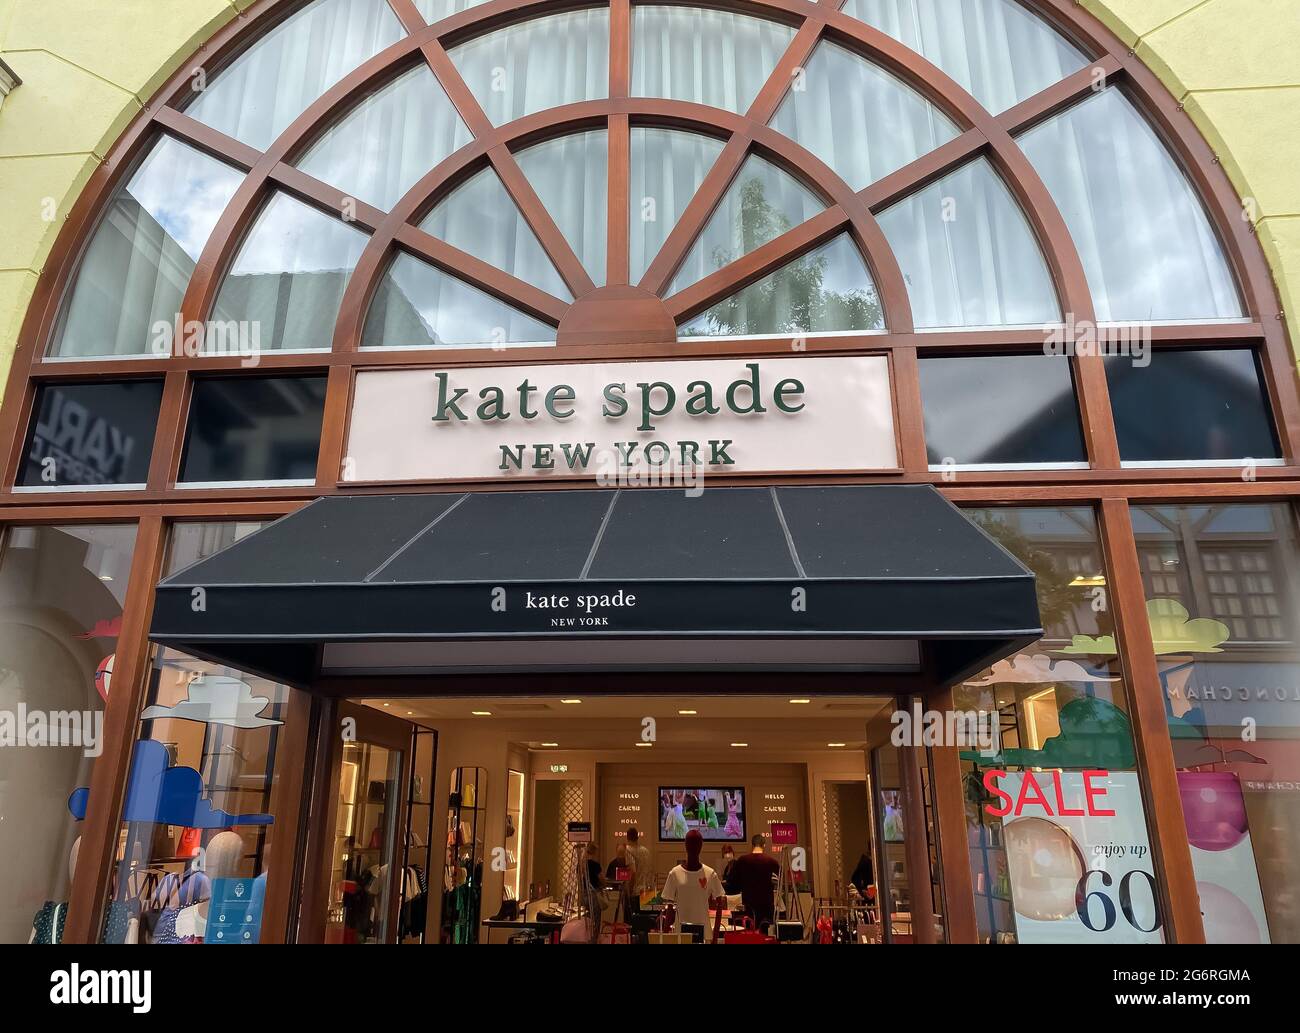 Roermond, Netherlands - July 1. 2021: View on store facade with logo  lettering of kate spade fashion brand Stock Photo - Alamy